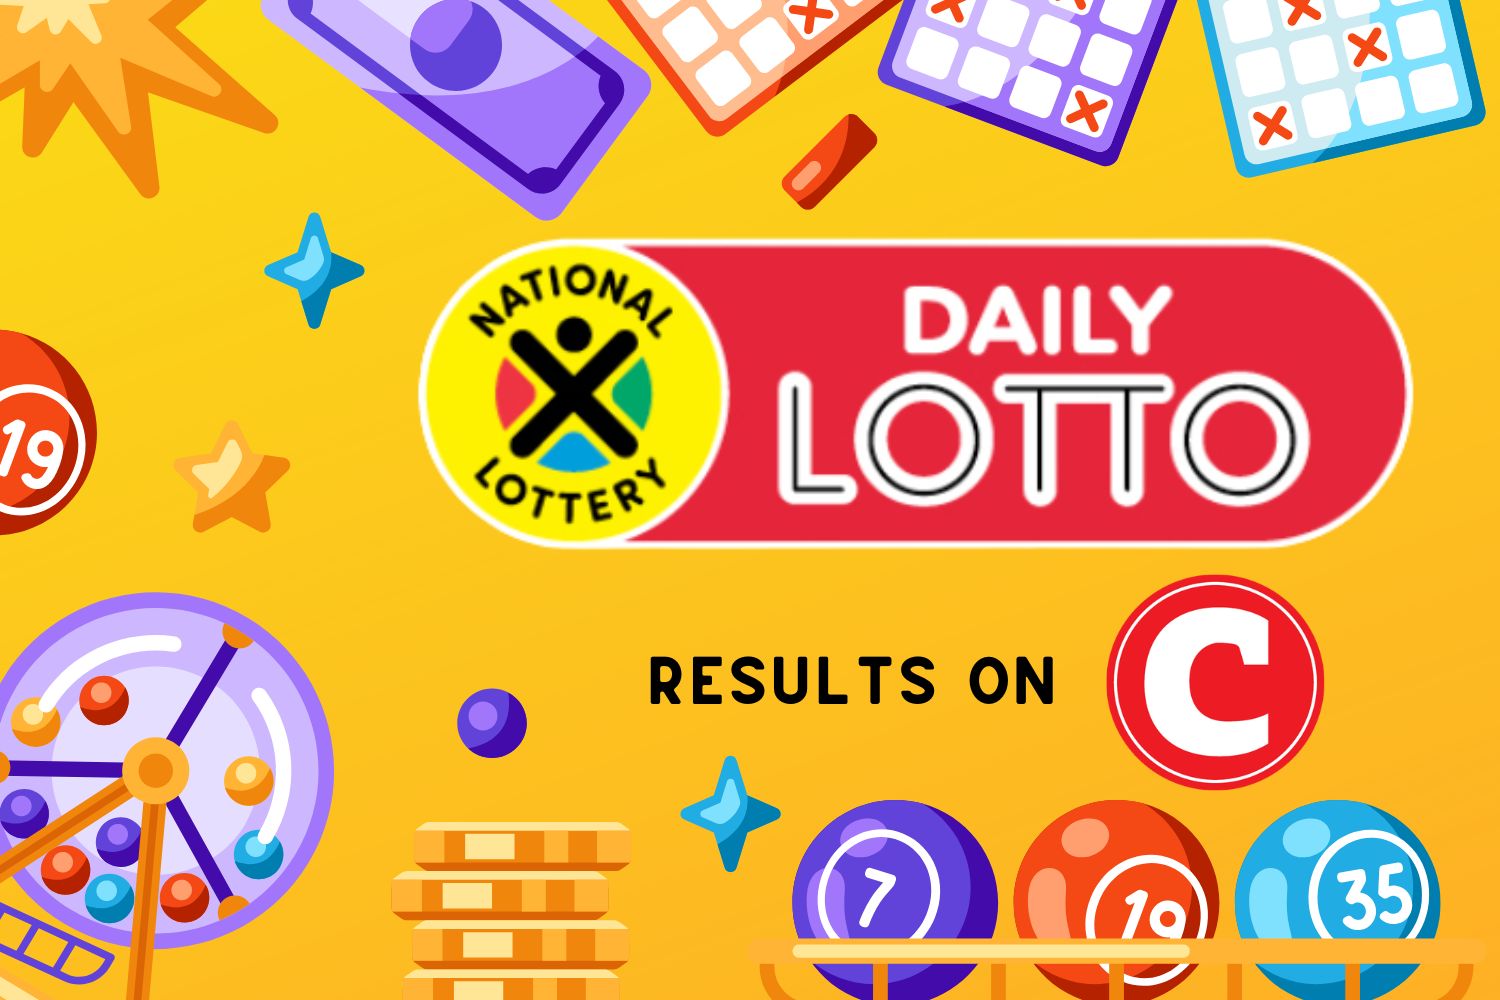 Daily Lotto Results - Wednesday